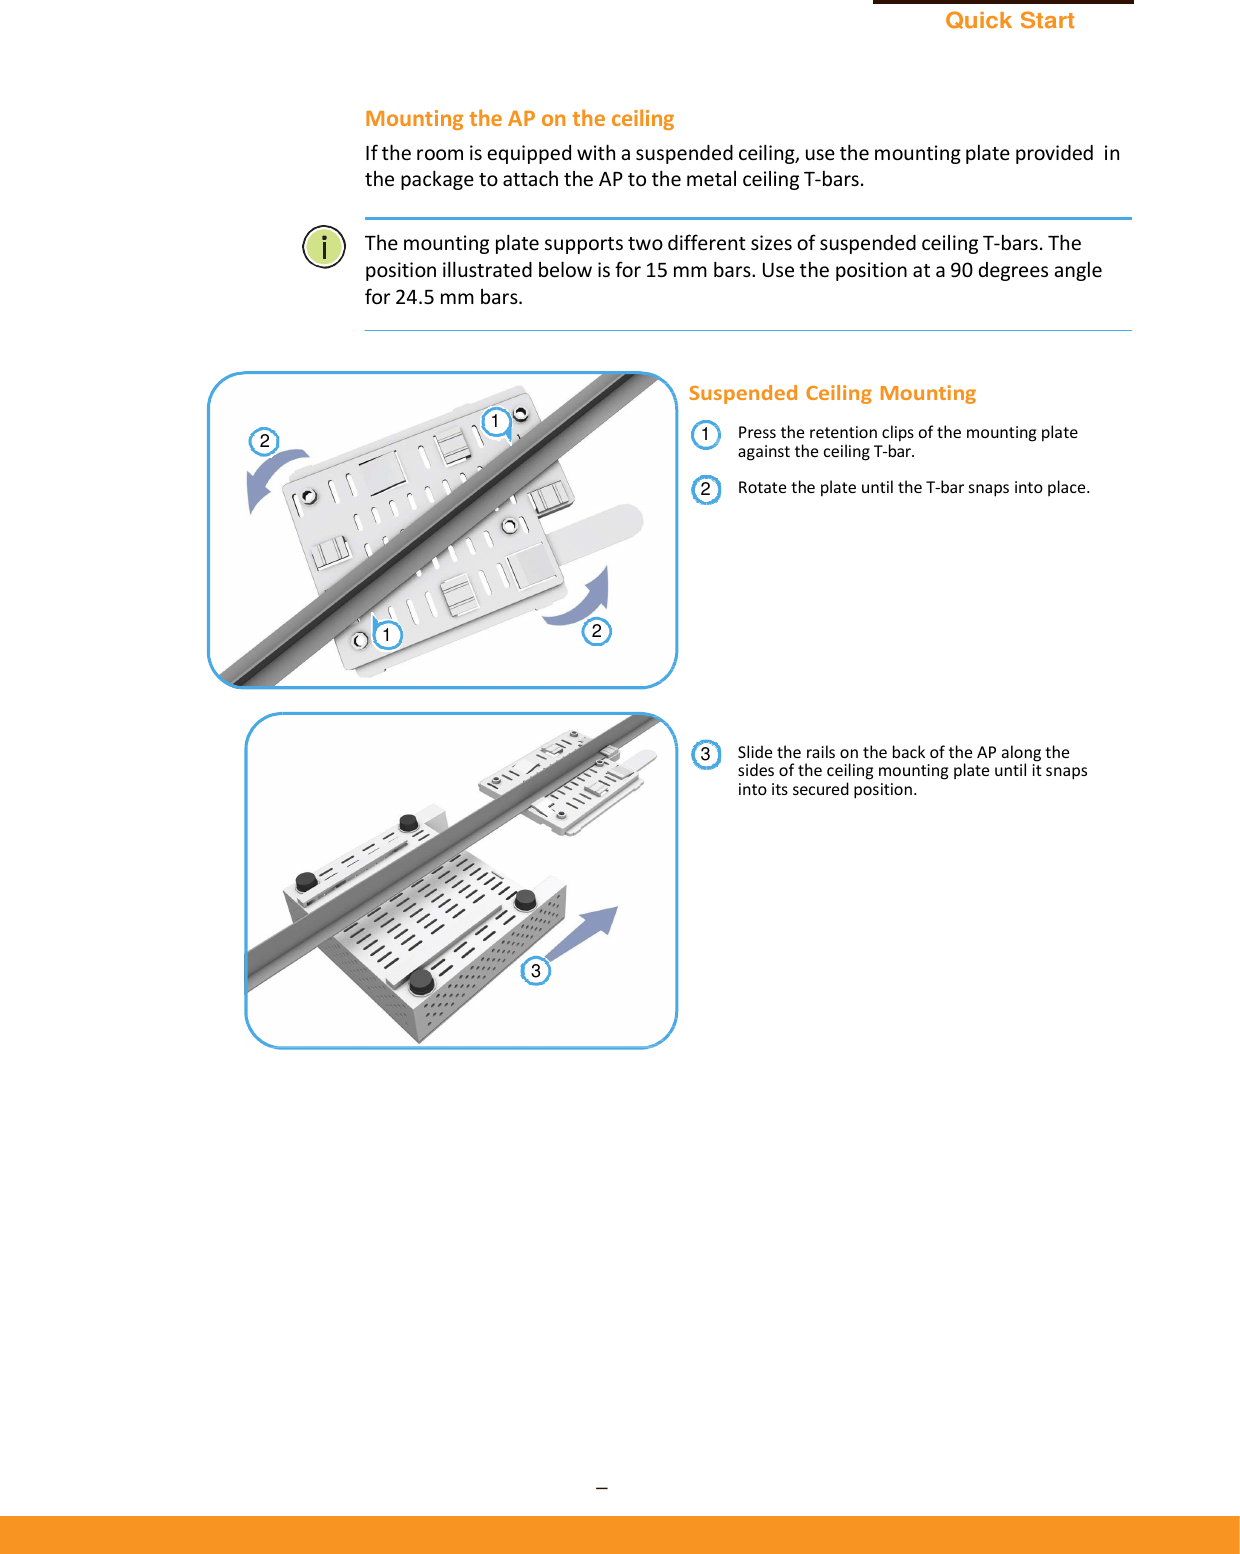 Quick Start Guide – 4 –      Mounting the AP on the ceiling If the room is equipped with a suspended ceiling, use the mounting plate provided in the package to attach the AP to the metal ceiling T-bars.   The mounting plate supports two different sizes of suspended ceiling T-bars. The position illustrated below is for 15 mm bars. Use the position at a 90 degrees angle for 24.5 mm bars.     Suspended Ceiling Mounting Press the retention clips of the mounting plate against the ceiling T-bar. Rotate the plate until the T-bar snaps into place.            Slide the rails on the back of the AP along the sides of the ceiling mounting plate until it snaps into its secured position. 312121 2 3 